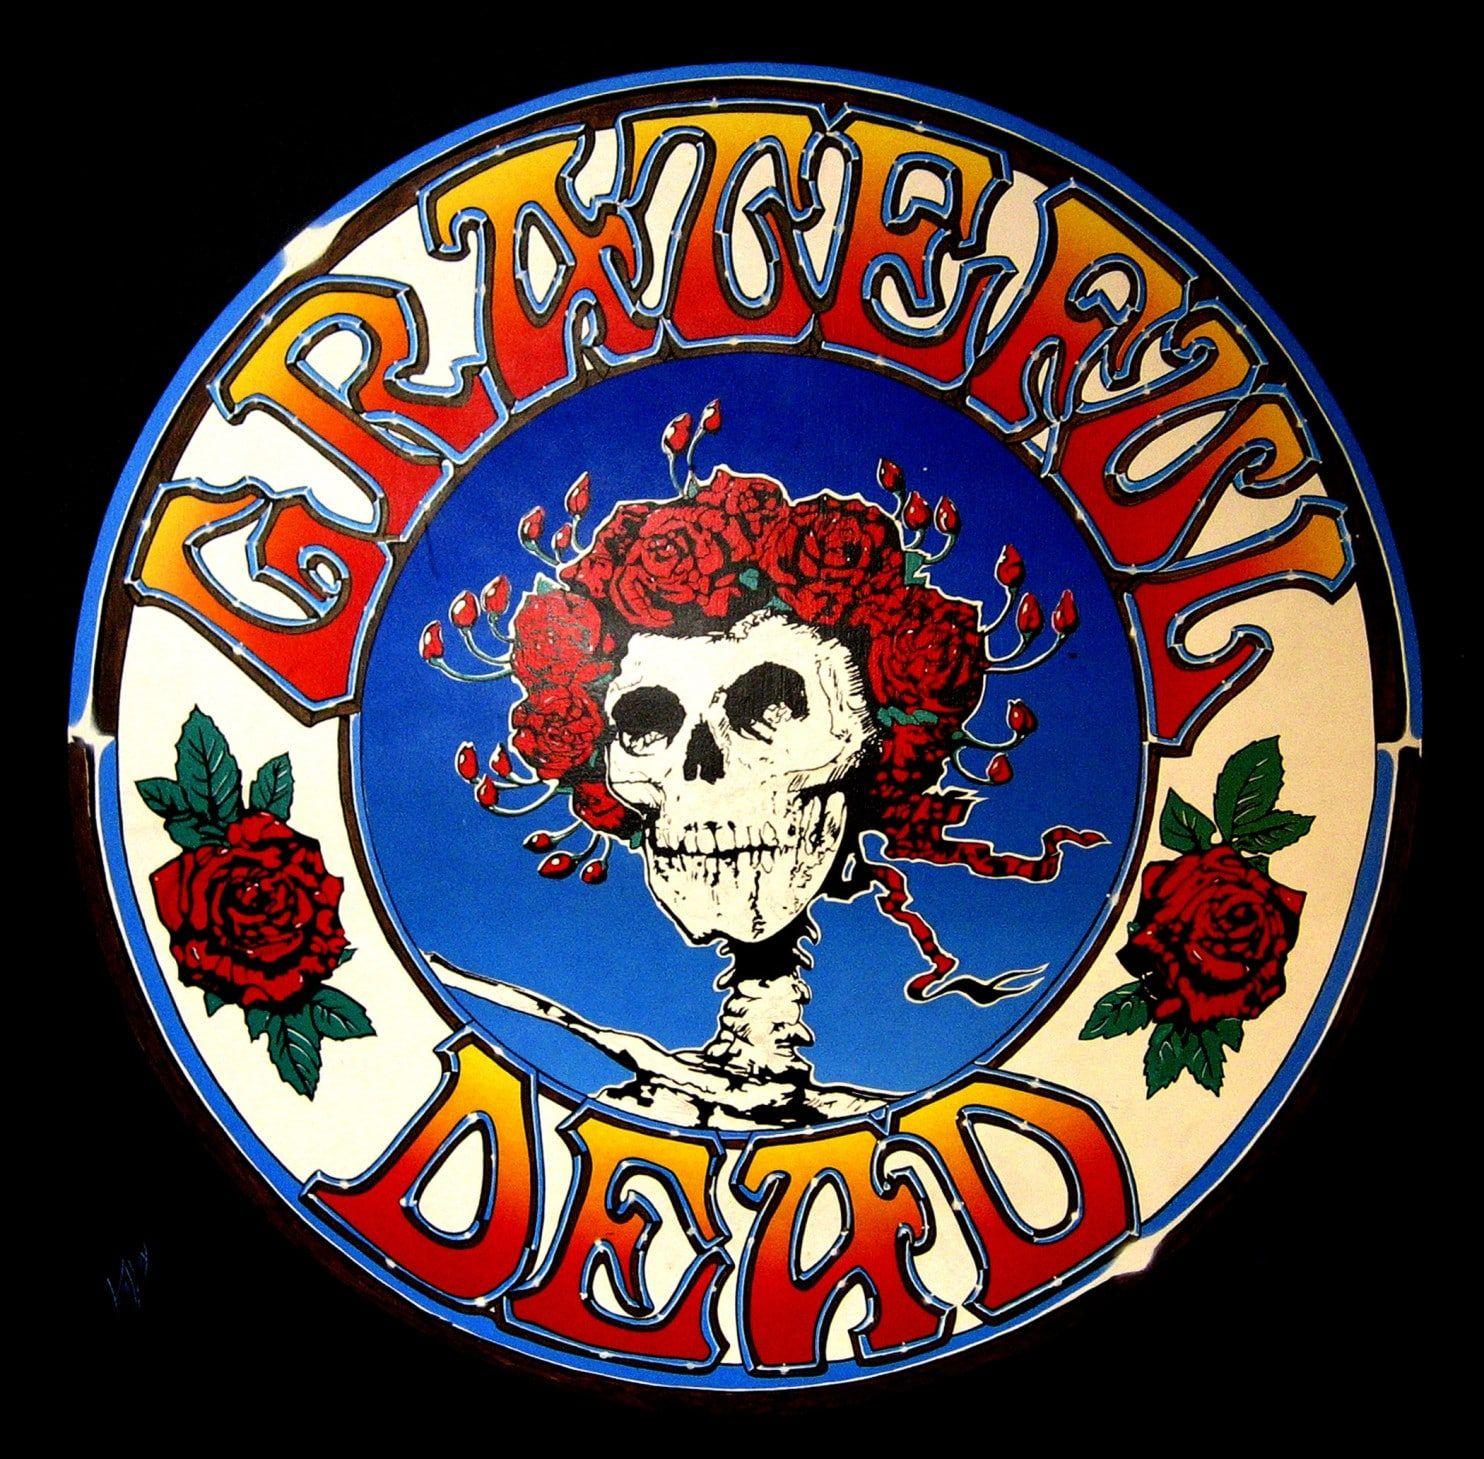 Grateful Dead Logo - Meet the artist who invented the Grateful Dead's skull and roses